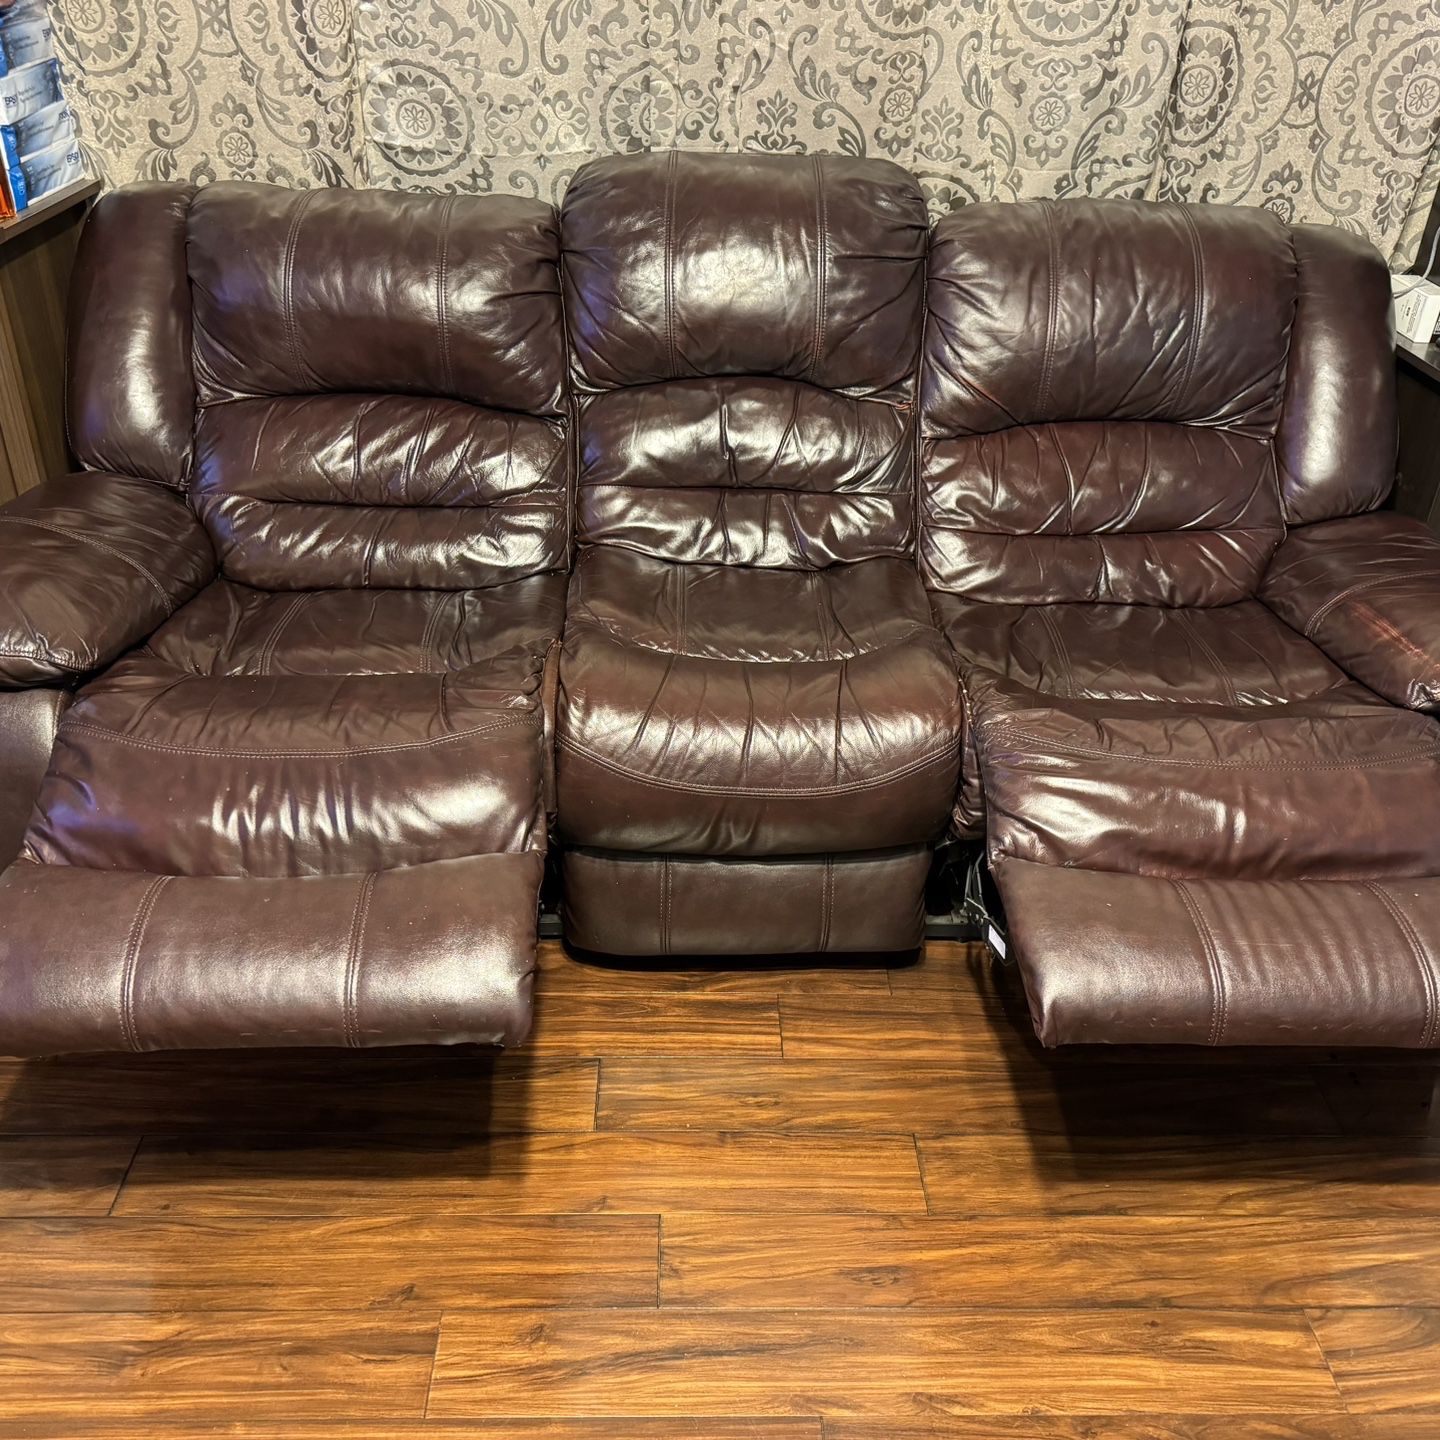 3 Sofas For Sale Shoot Me An Offer 